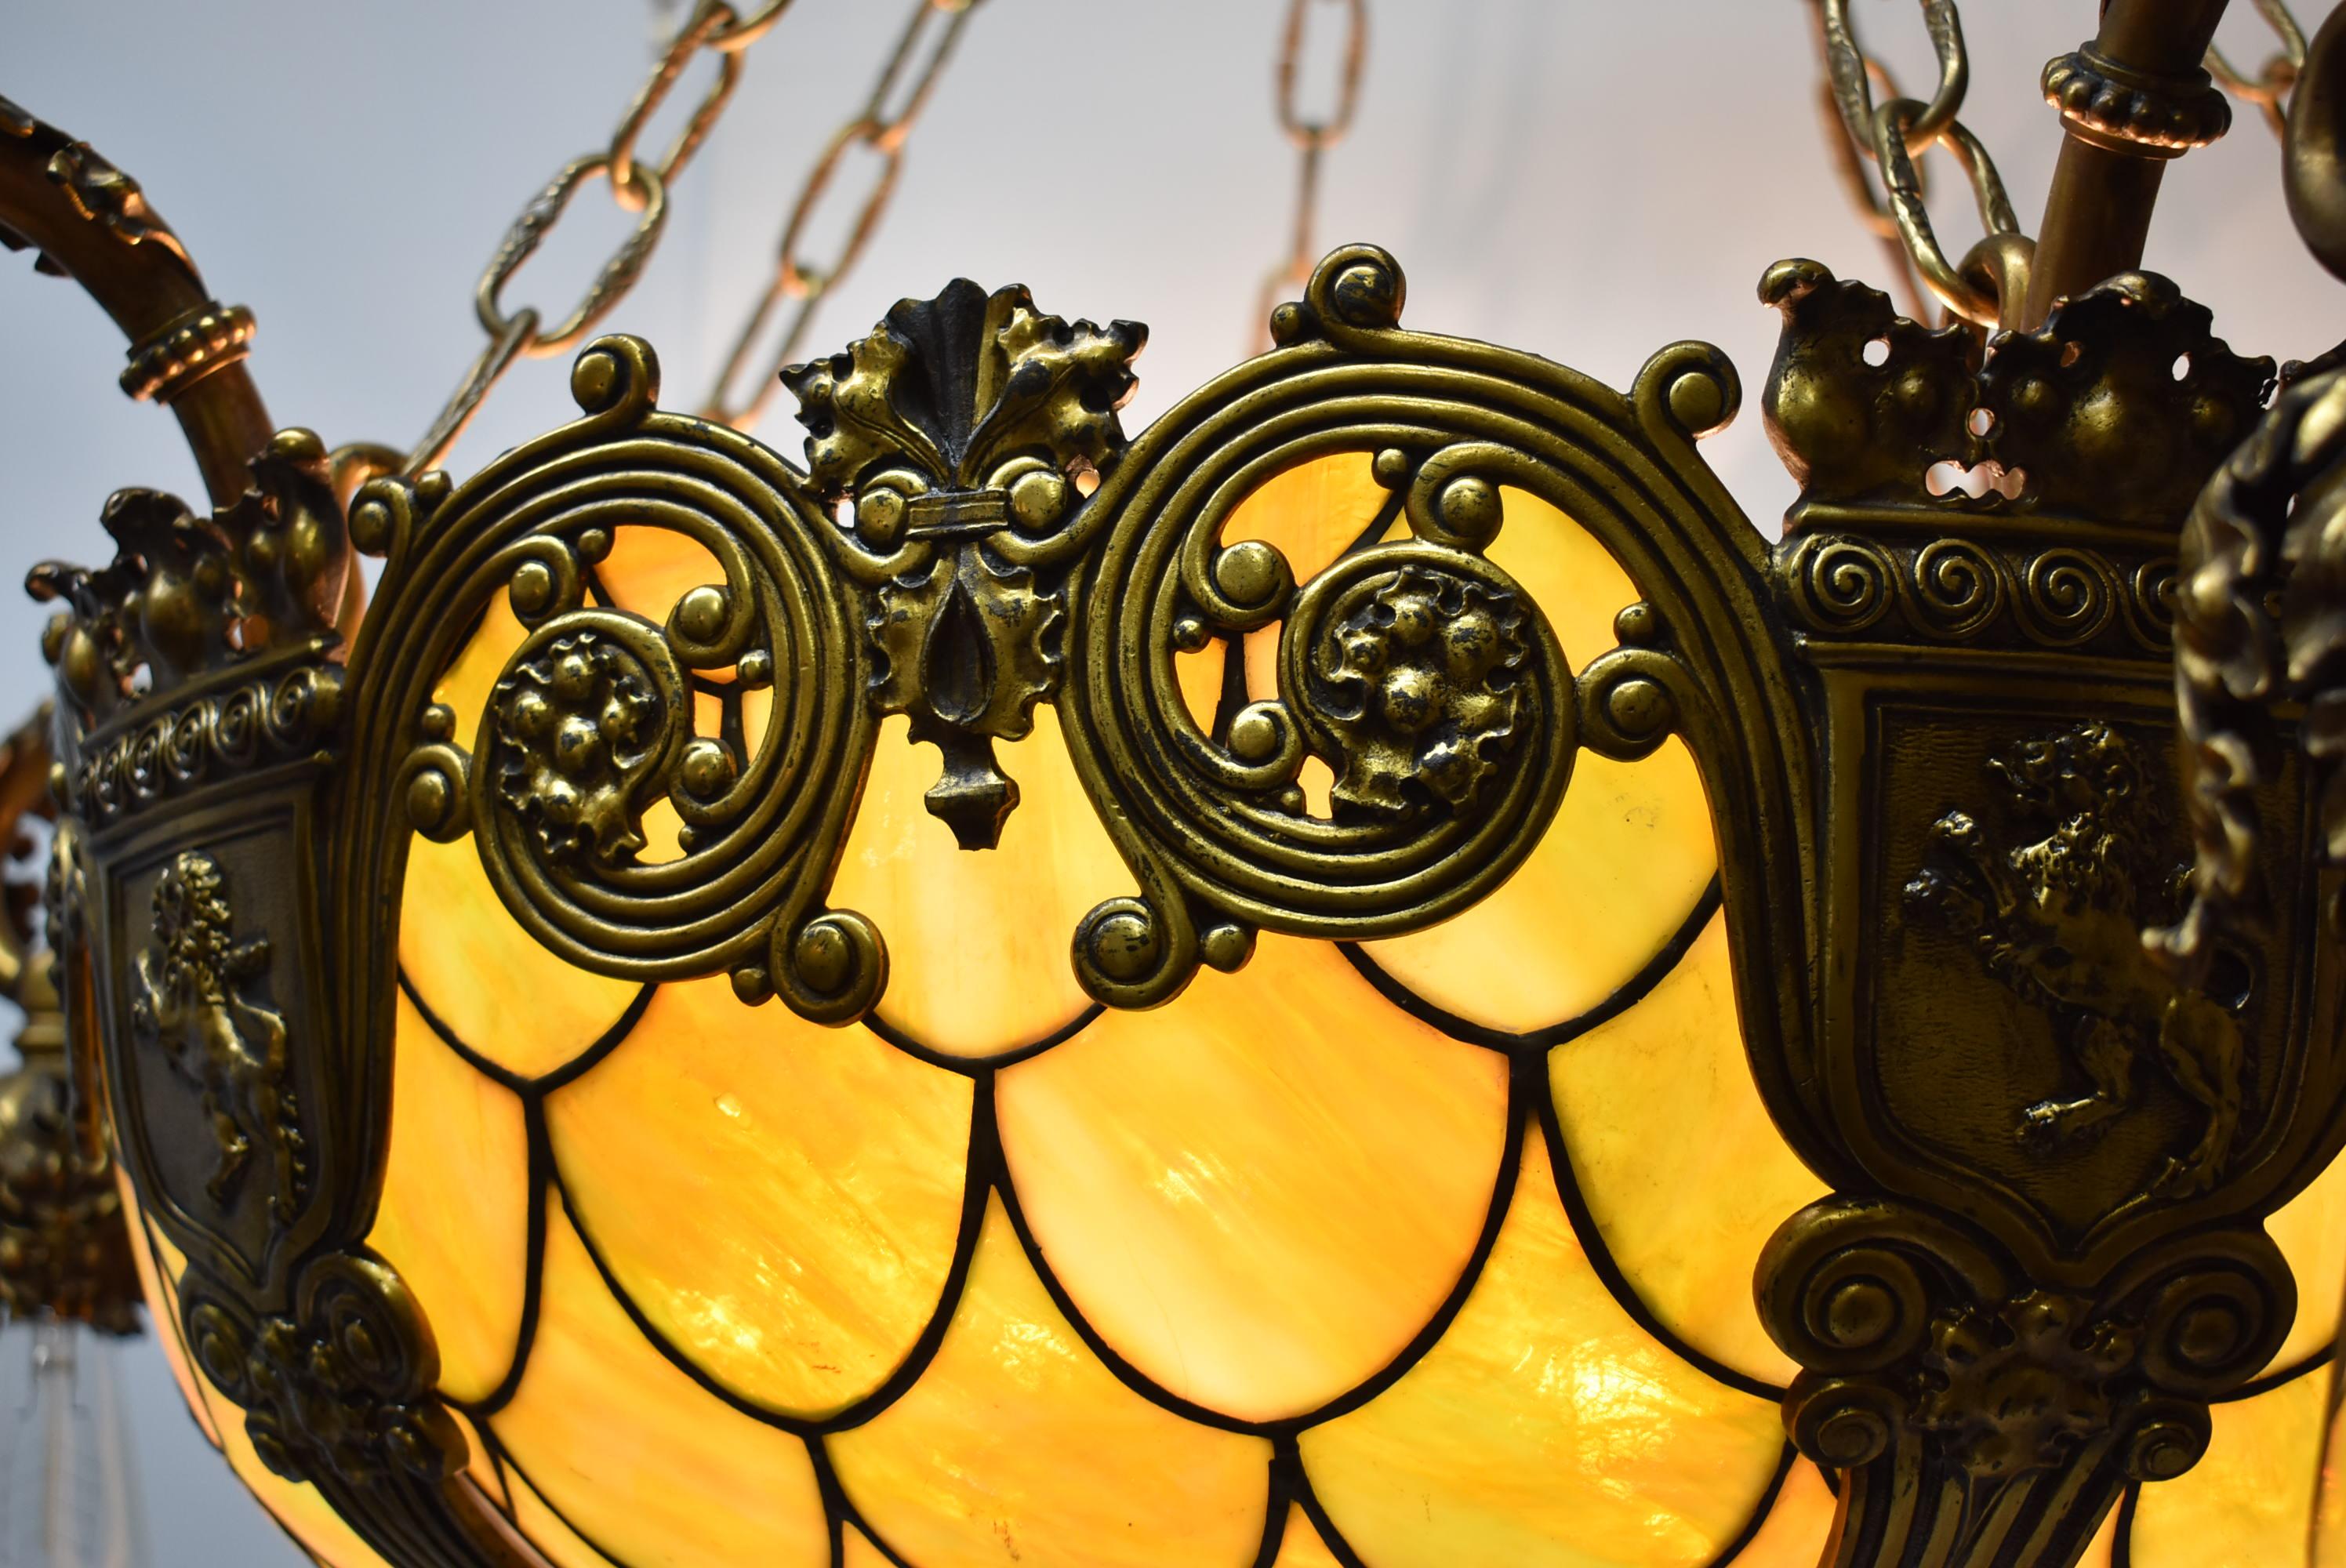 Cast Bronze Gothic Revival Fish Scale Leaded Glass Chandelier Att. Duffner & Kimberly For Sale